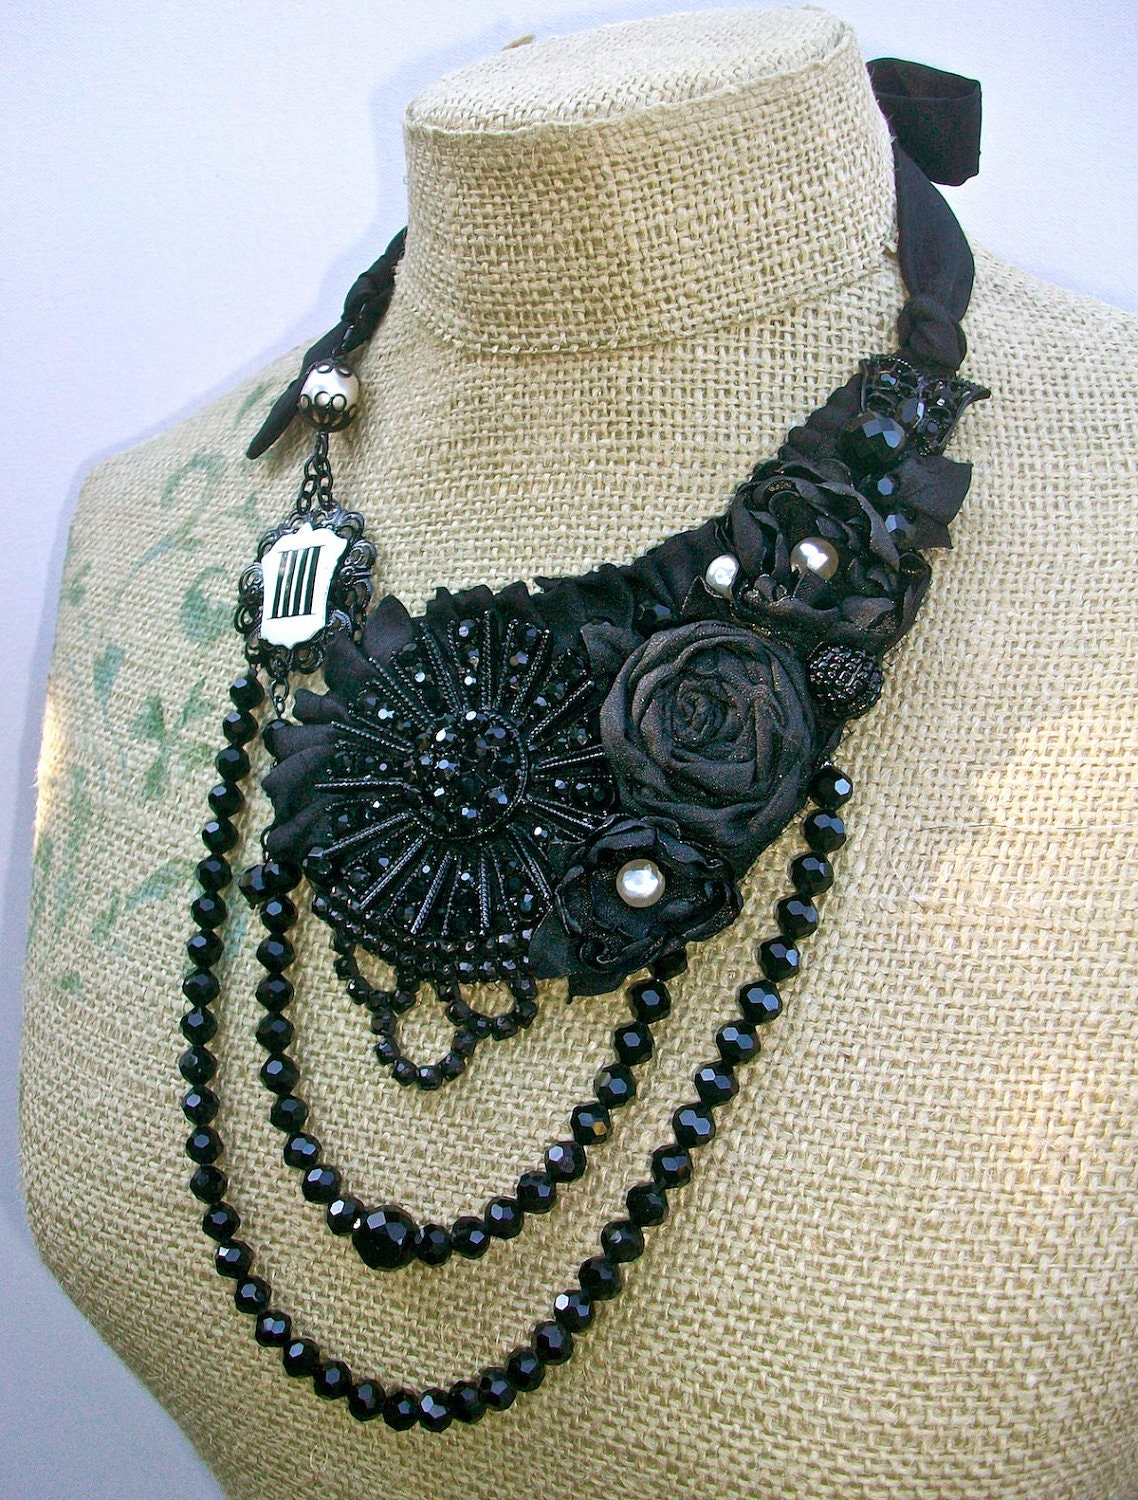 Symphony no. 4-  Statement Bib necklace with Vintage findings